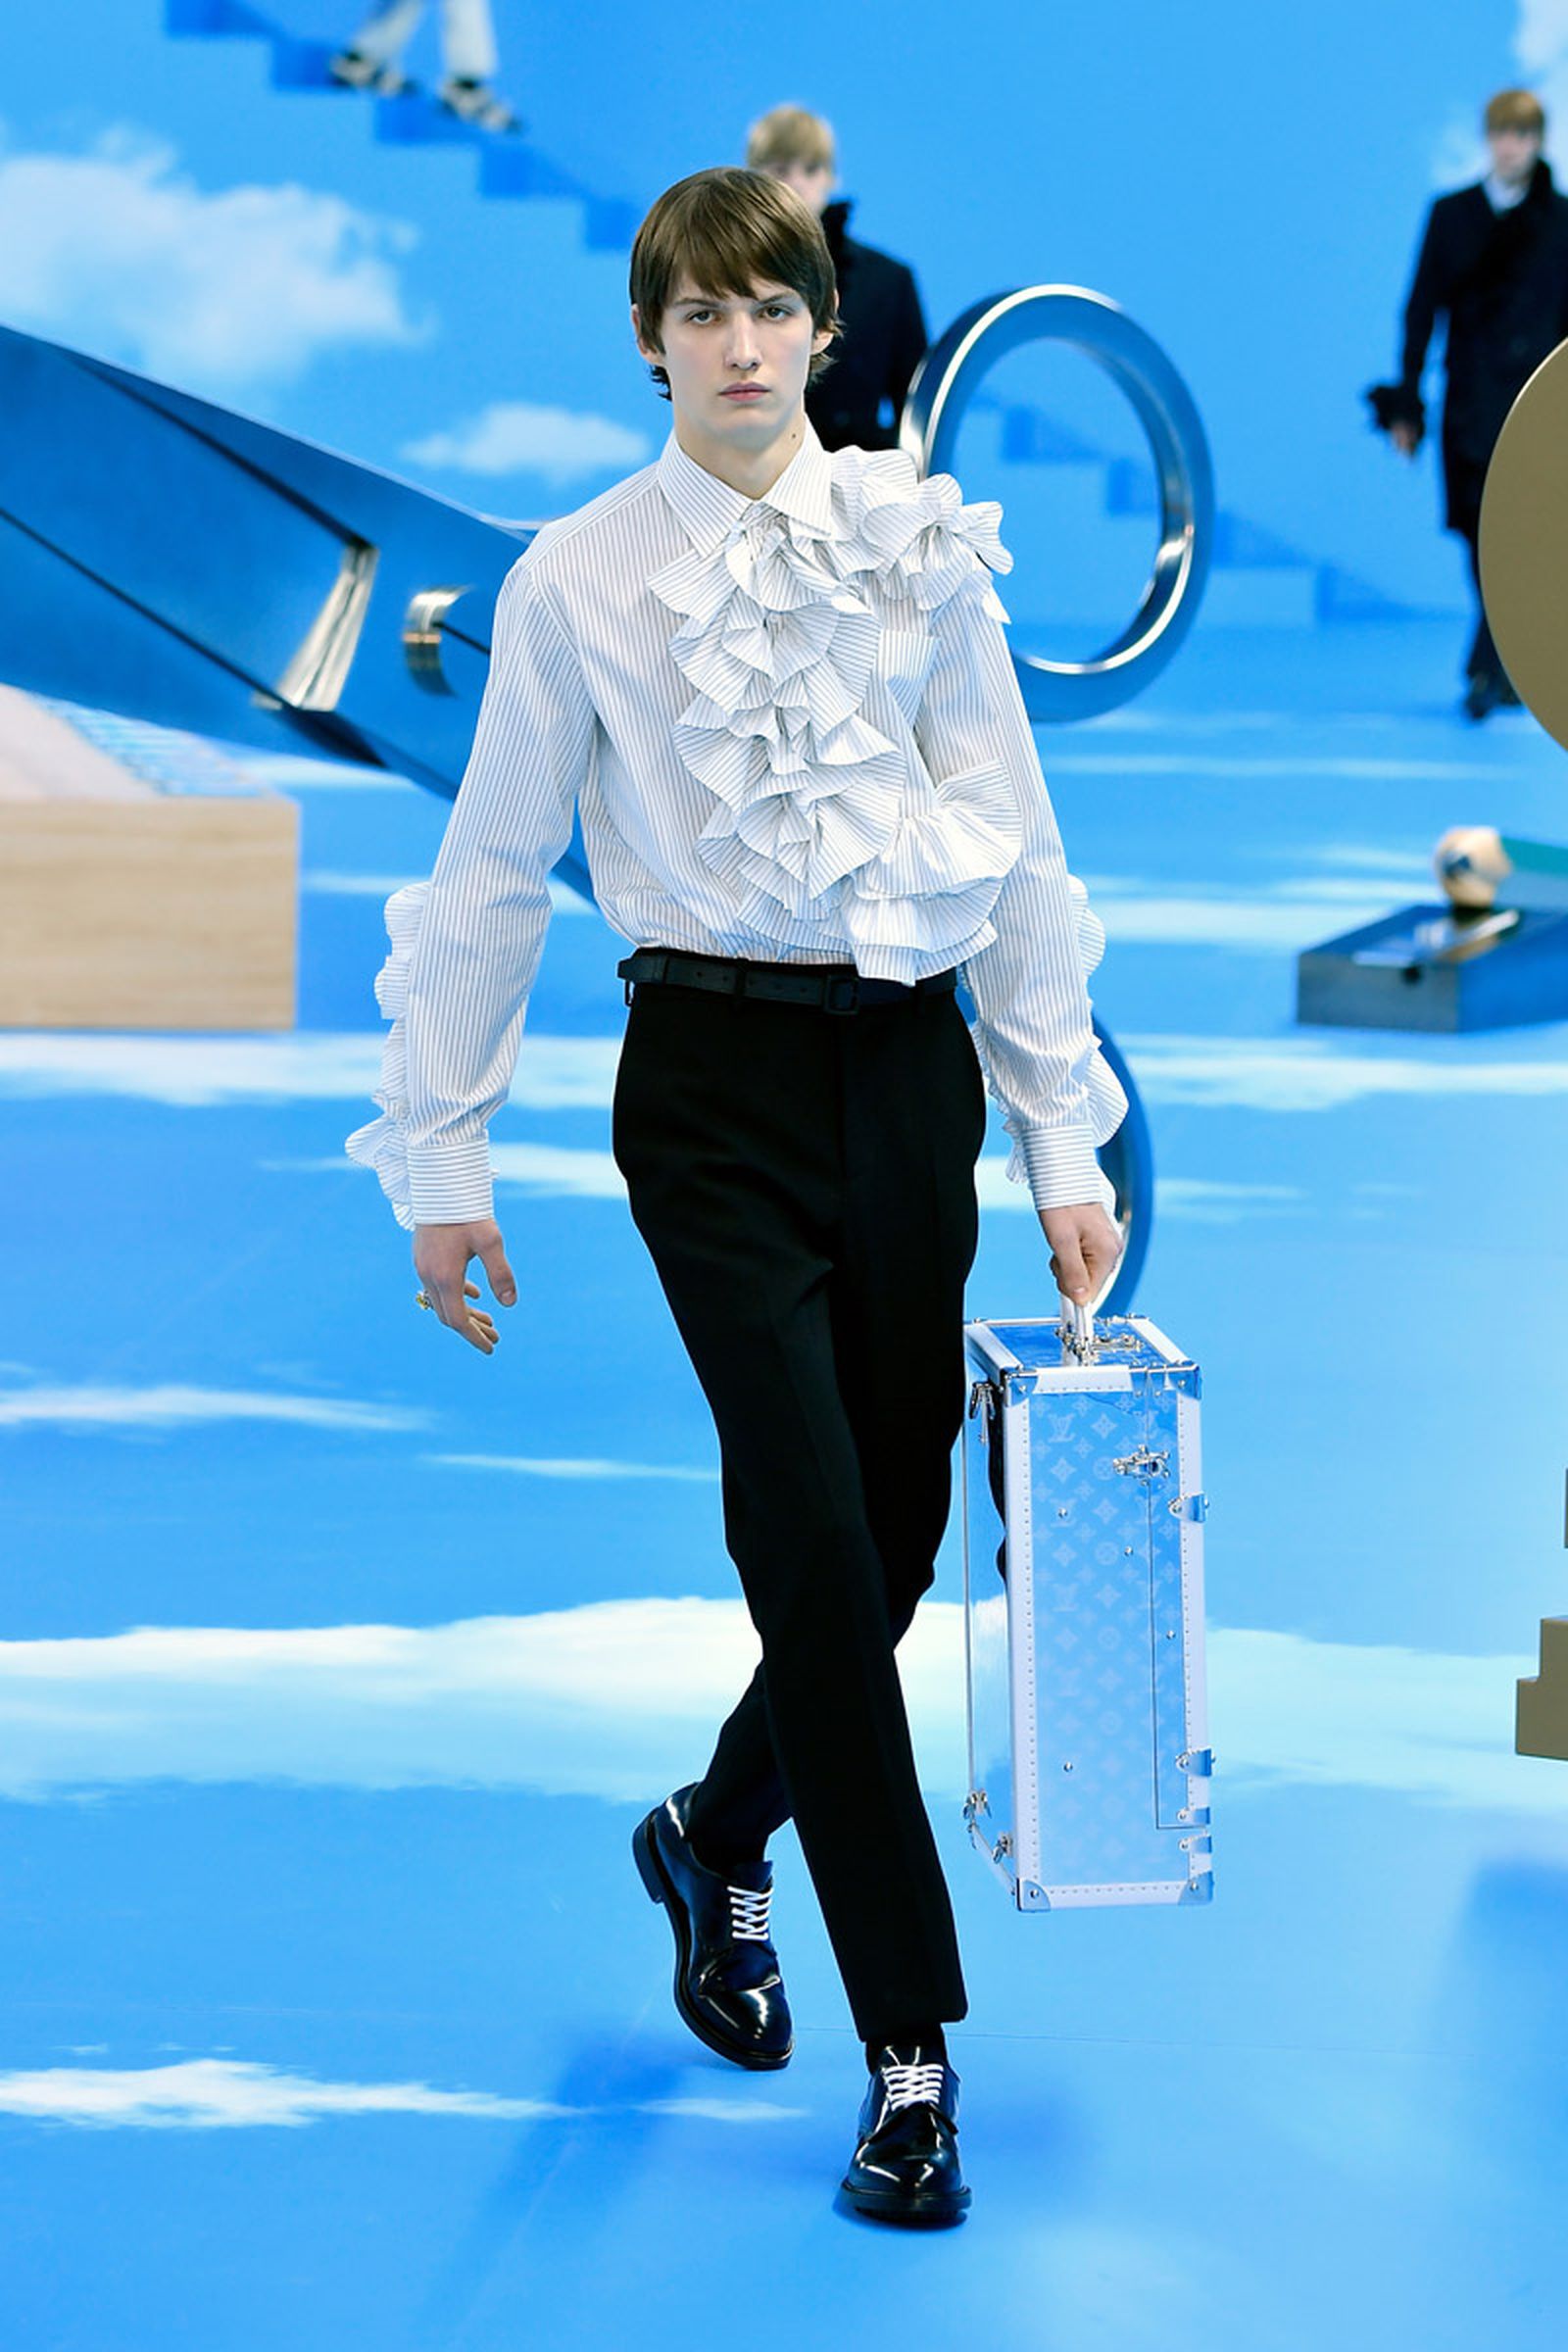 PARIS, FRANCE - JANUARY 16: A model walks the runway during the Louis Vuitton Menswear Fall/Winter 2020-2021 show as part of Paris Fashion Week on January 16, 2020 in Paris, France. (Photo by Kristy Sparow/Getty Images)